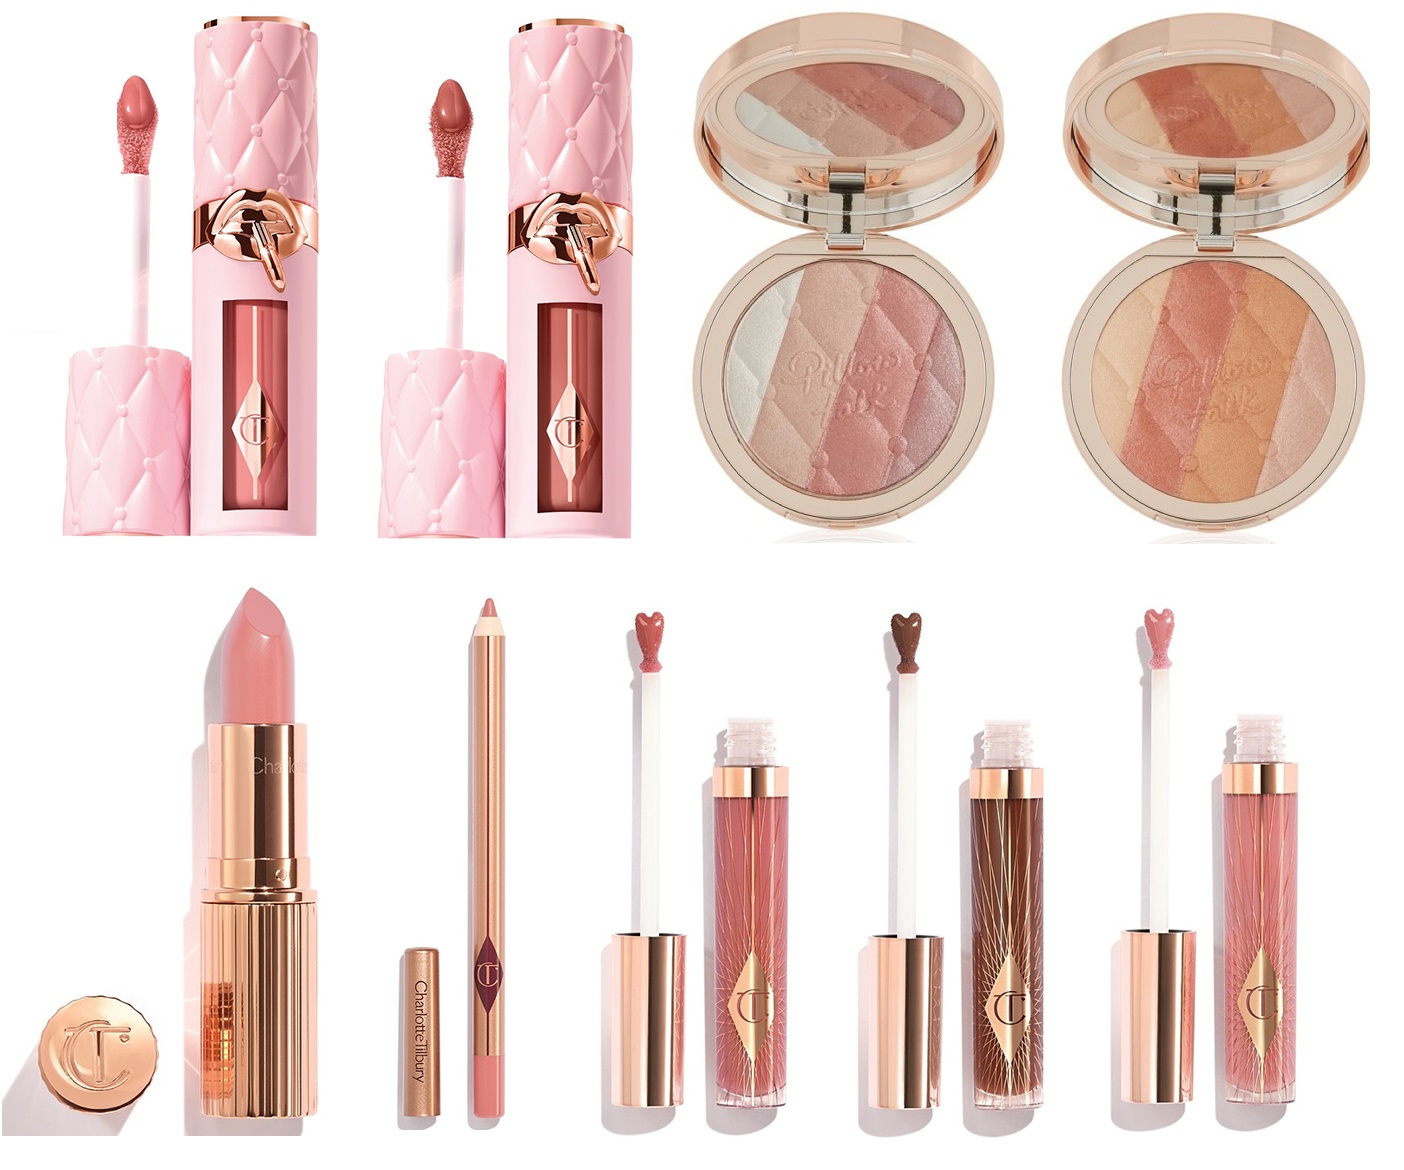 New additions to the Charlotte Tilbury Pillow Talk Сollection are coming soon.